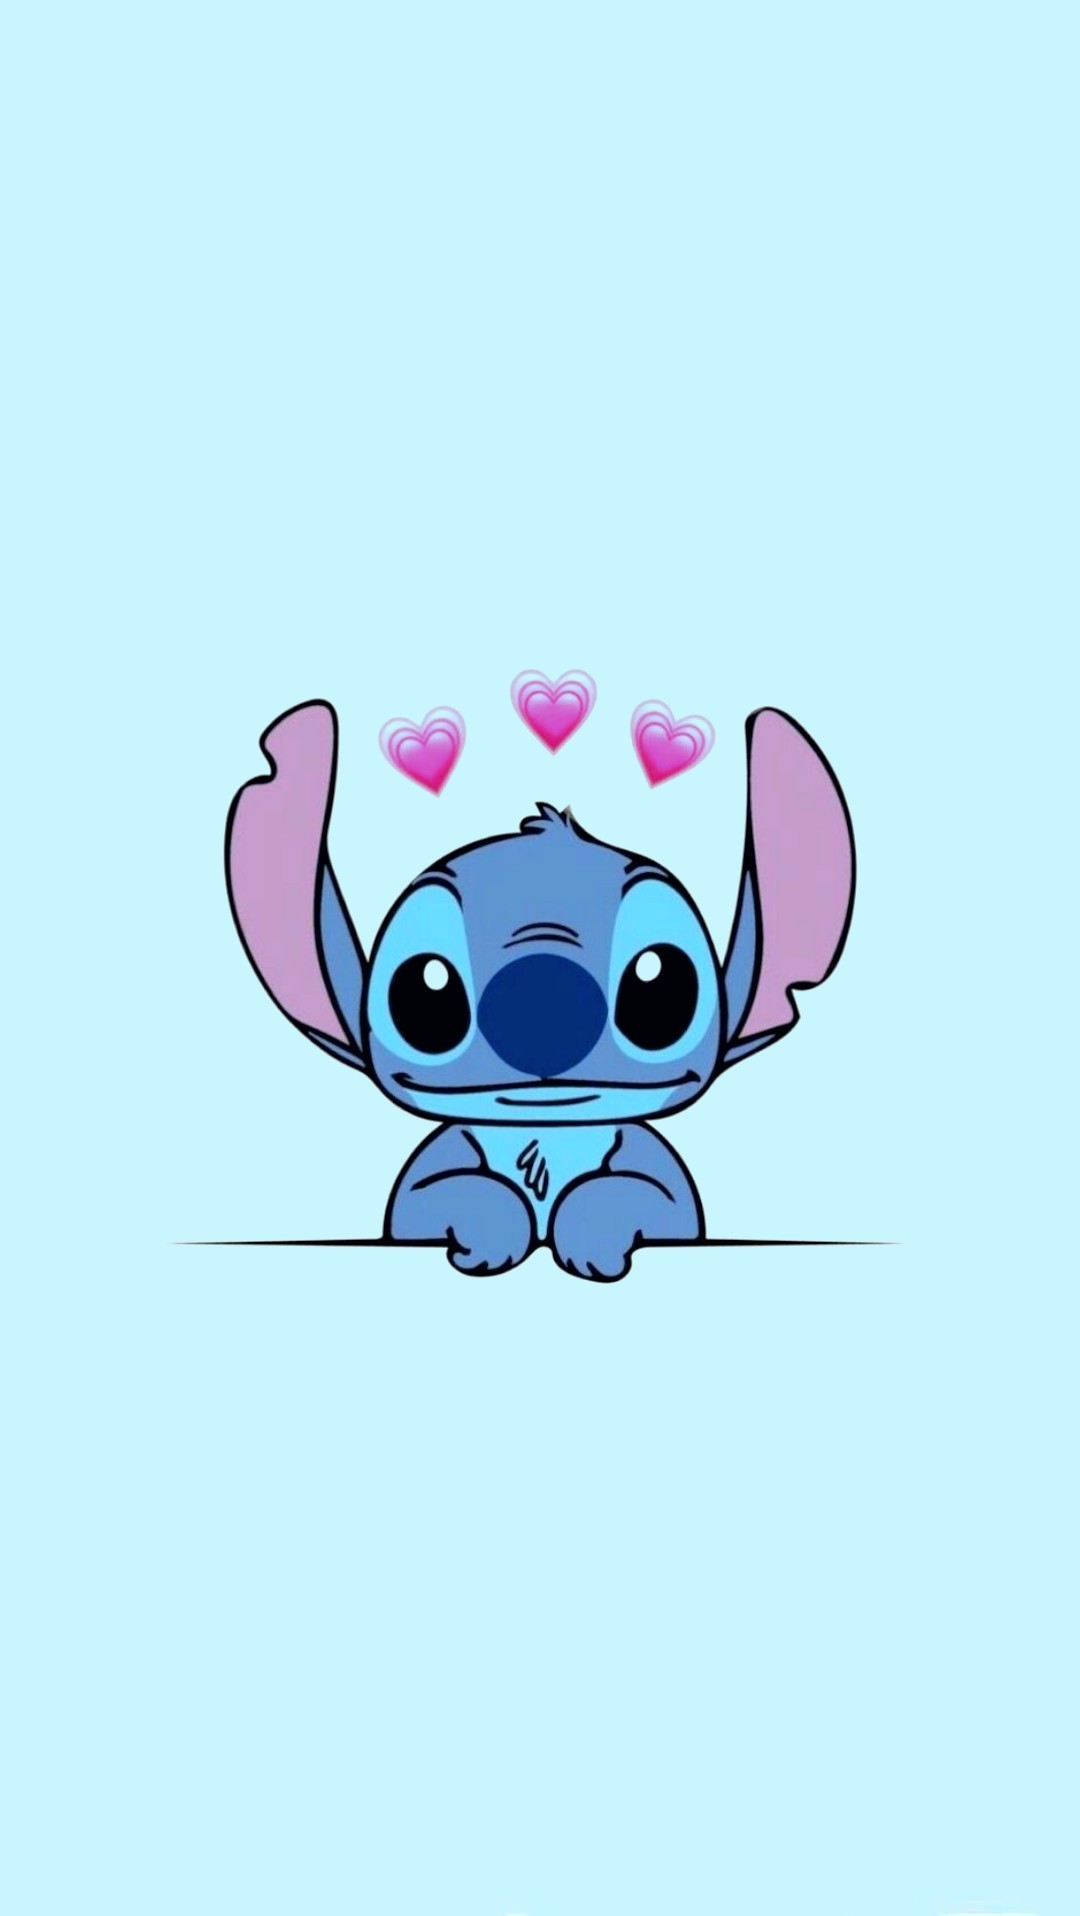 Stitch Iphone Wallpaper - KoLPaPer - Awesome Free HD Wallpapers